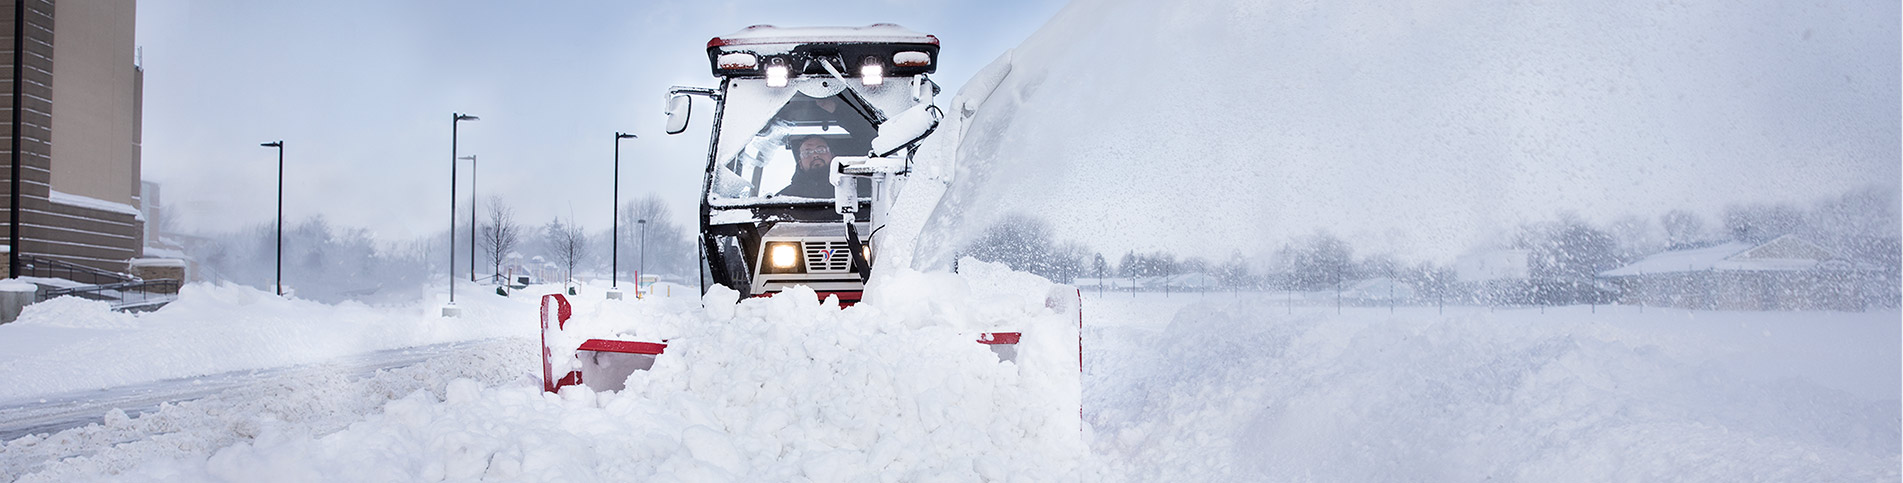 Best Snow Removal Equipment: Residential Snow Blowers & Tractors